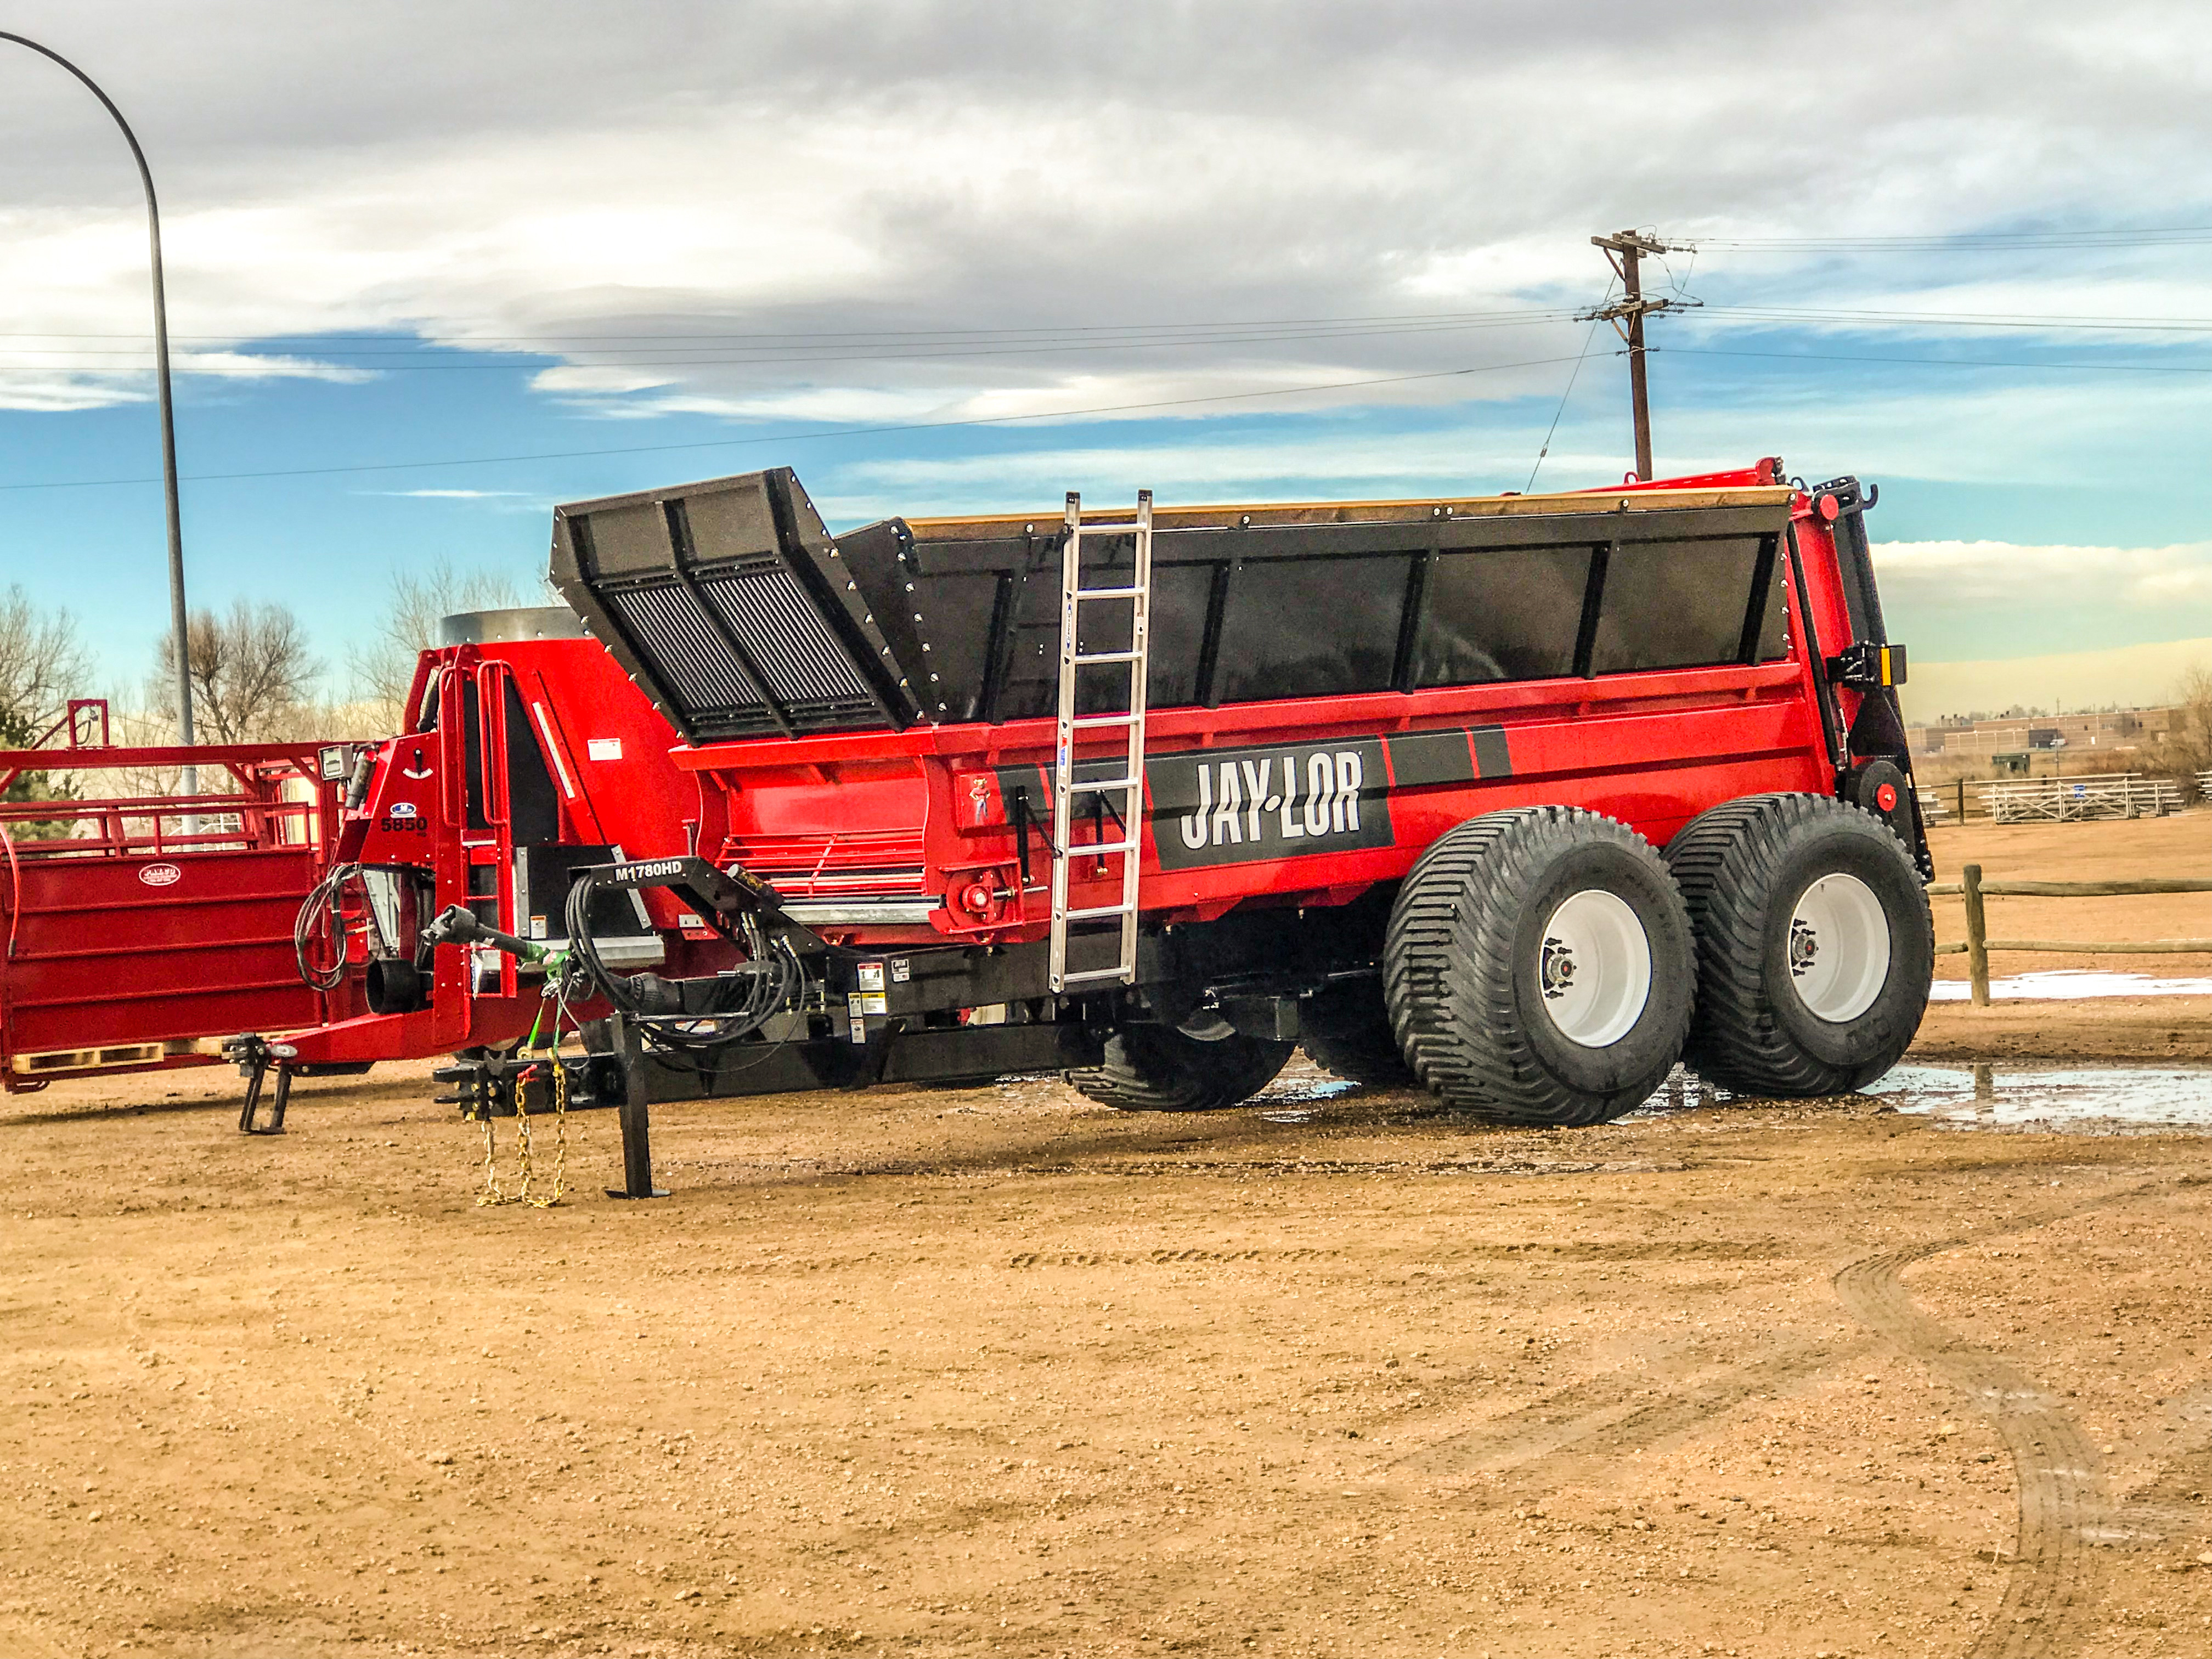 Heavy Equipment Washing Service Areas Include: Fort Collins, Loveland, Windsor, Greeley, Longmont, Berthoud, Estes Park, Wellington, Cheyenne Wyoming and surrounding areas